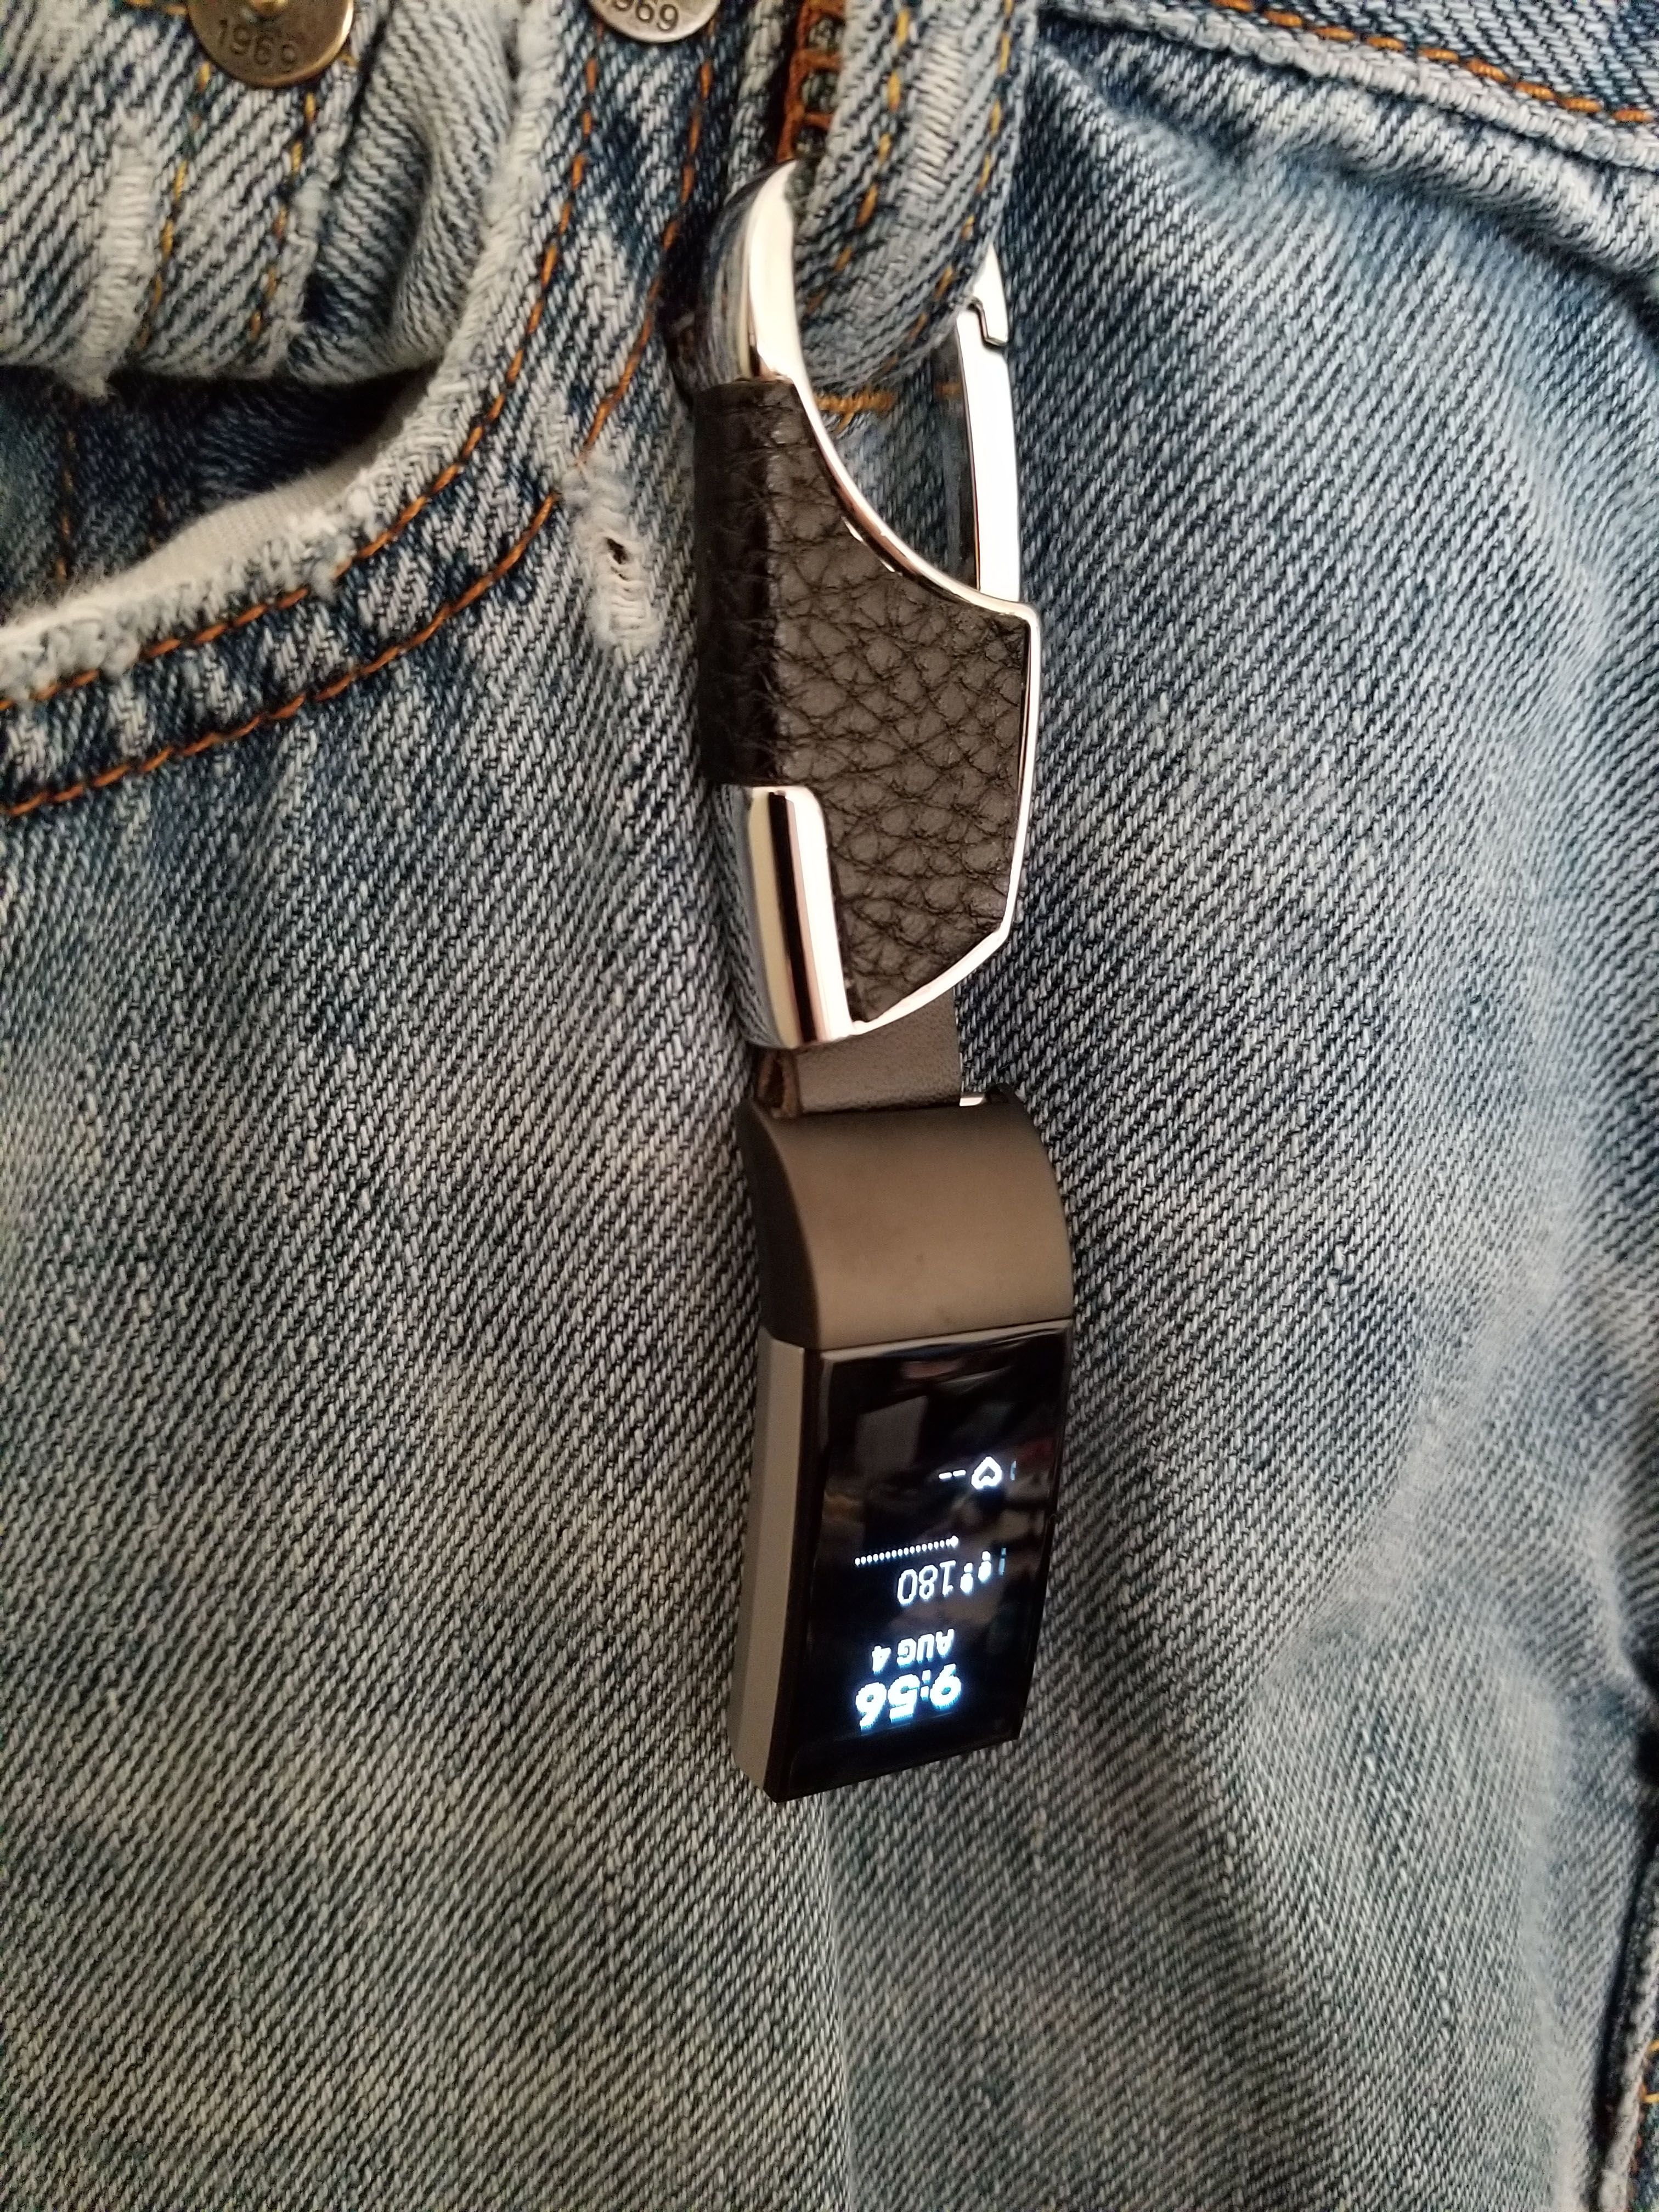 fitbit charge 3 waist clip